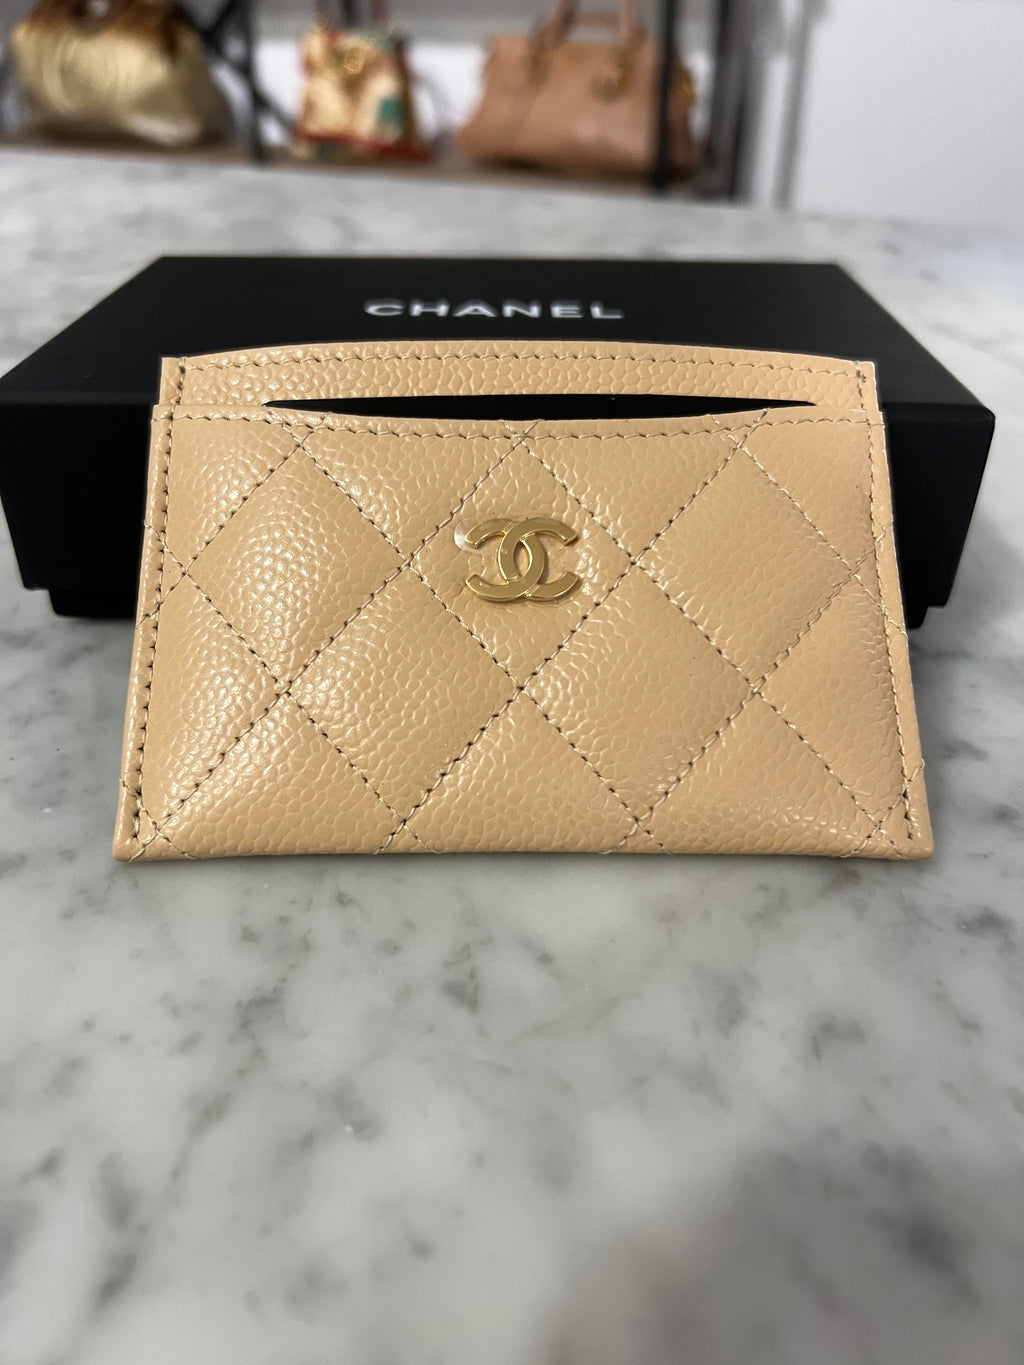 CHANEL Lambskin Quilted Chanel 19 Card Holder Blue 696830